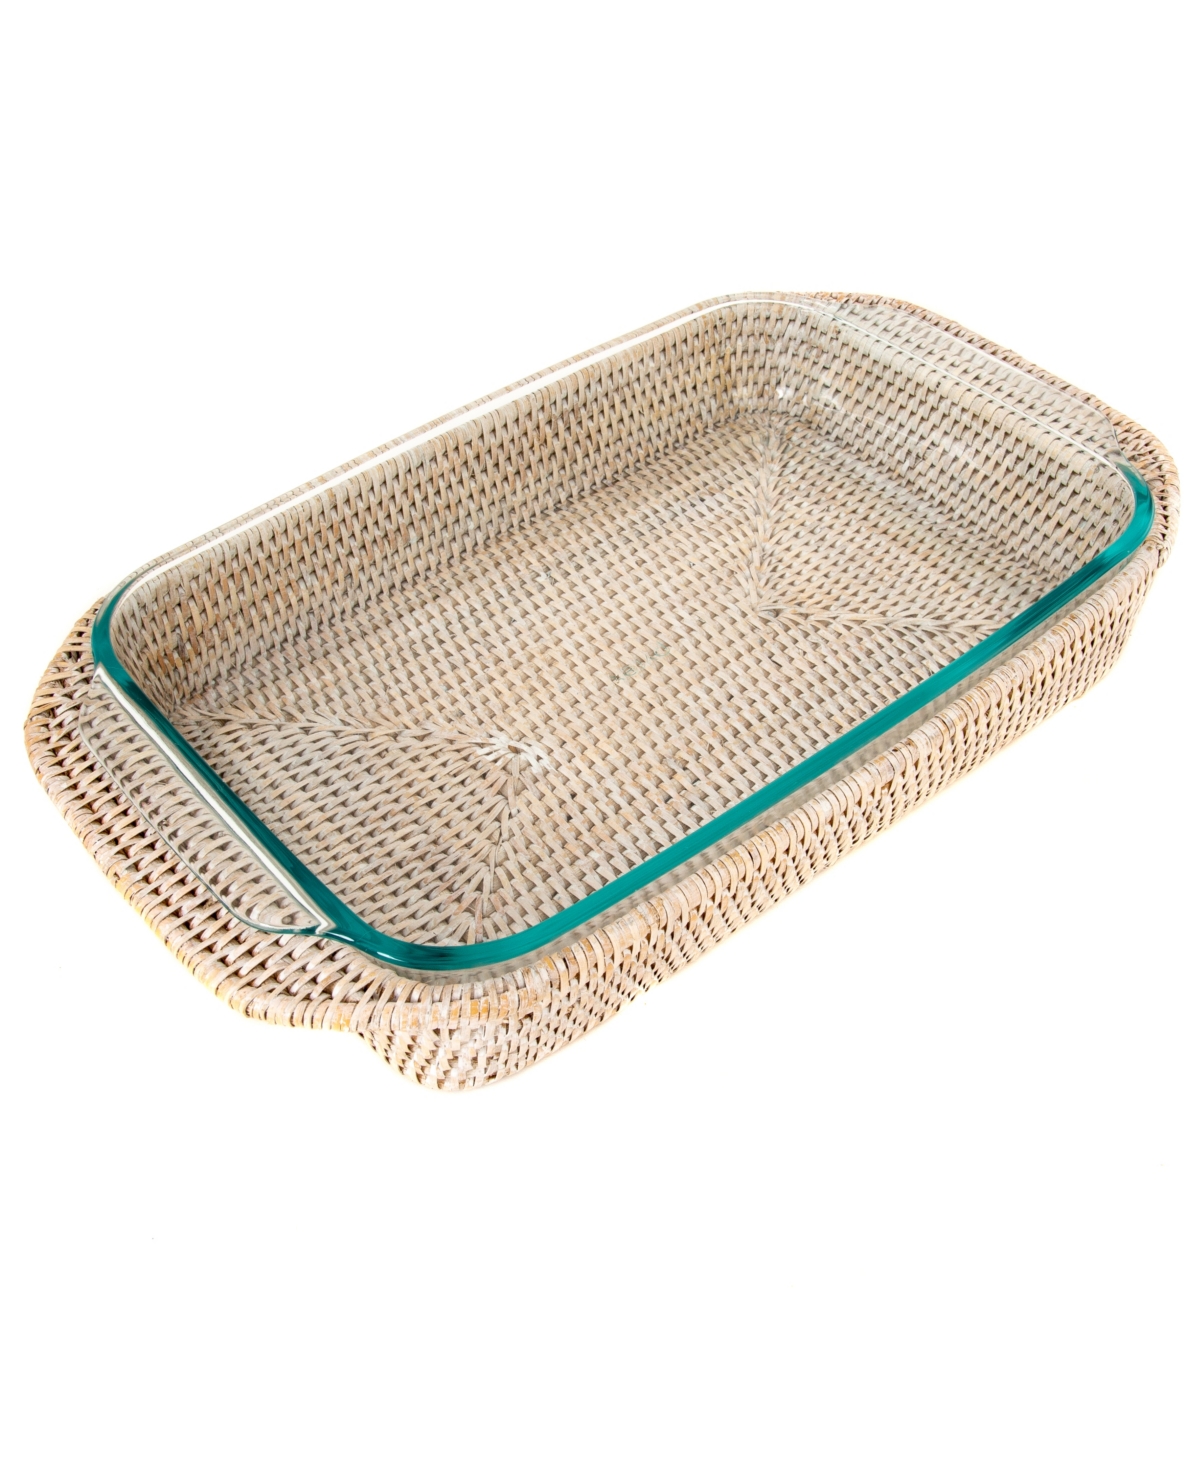 Artifacts Trading Company Artifacts Rattan Rectangular Baker Basket With Pyrex In Off-white